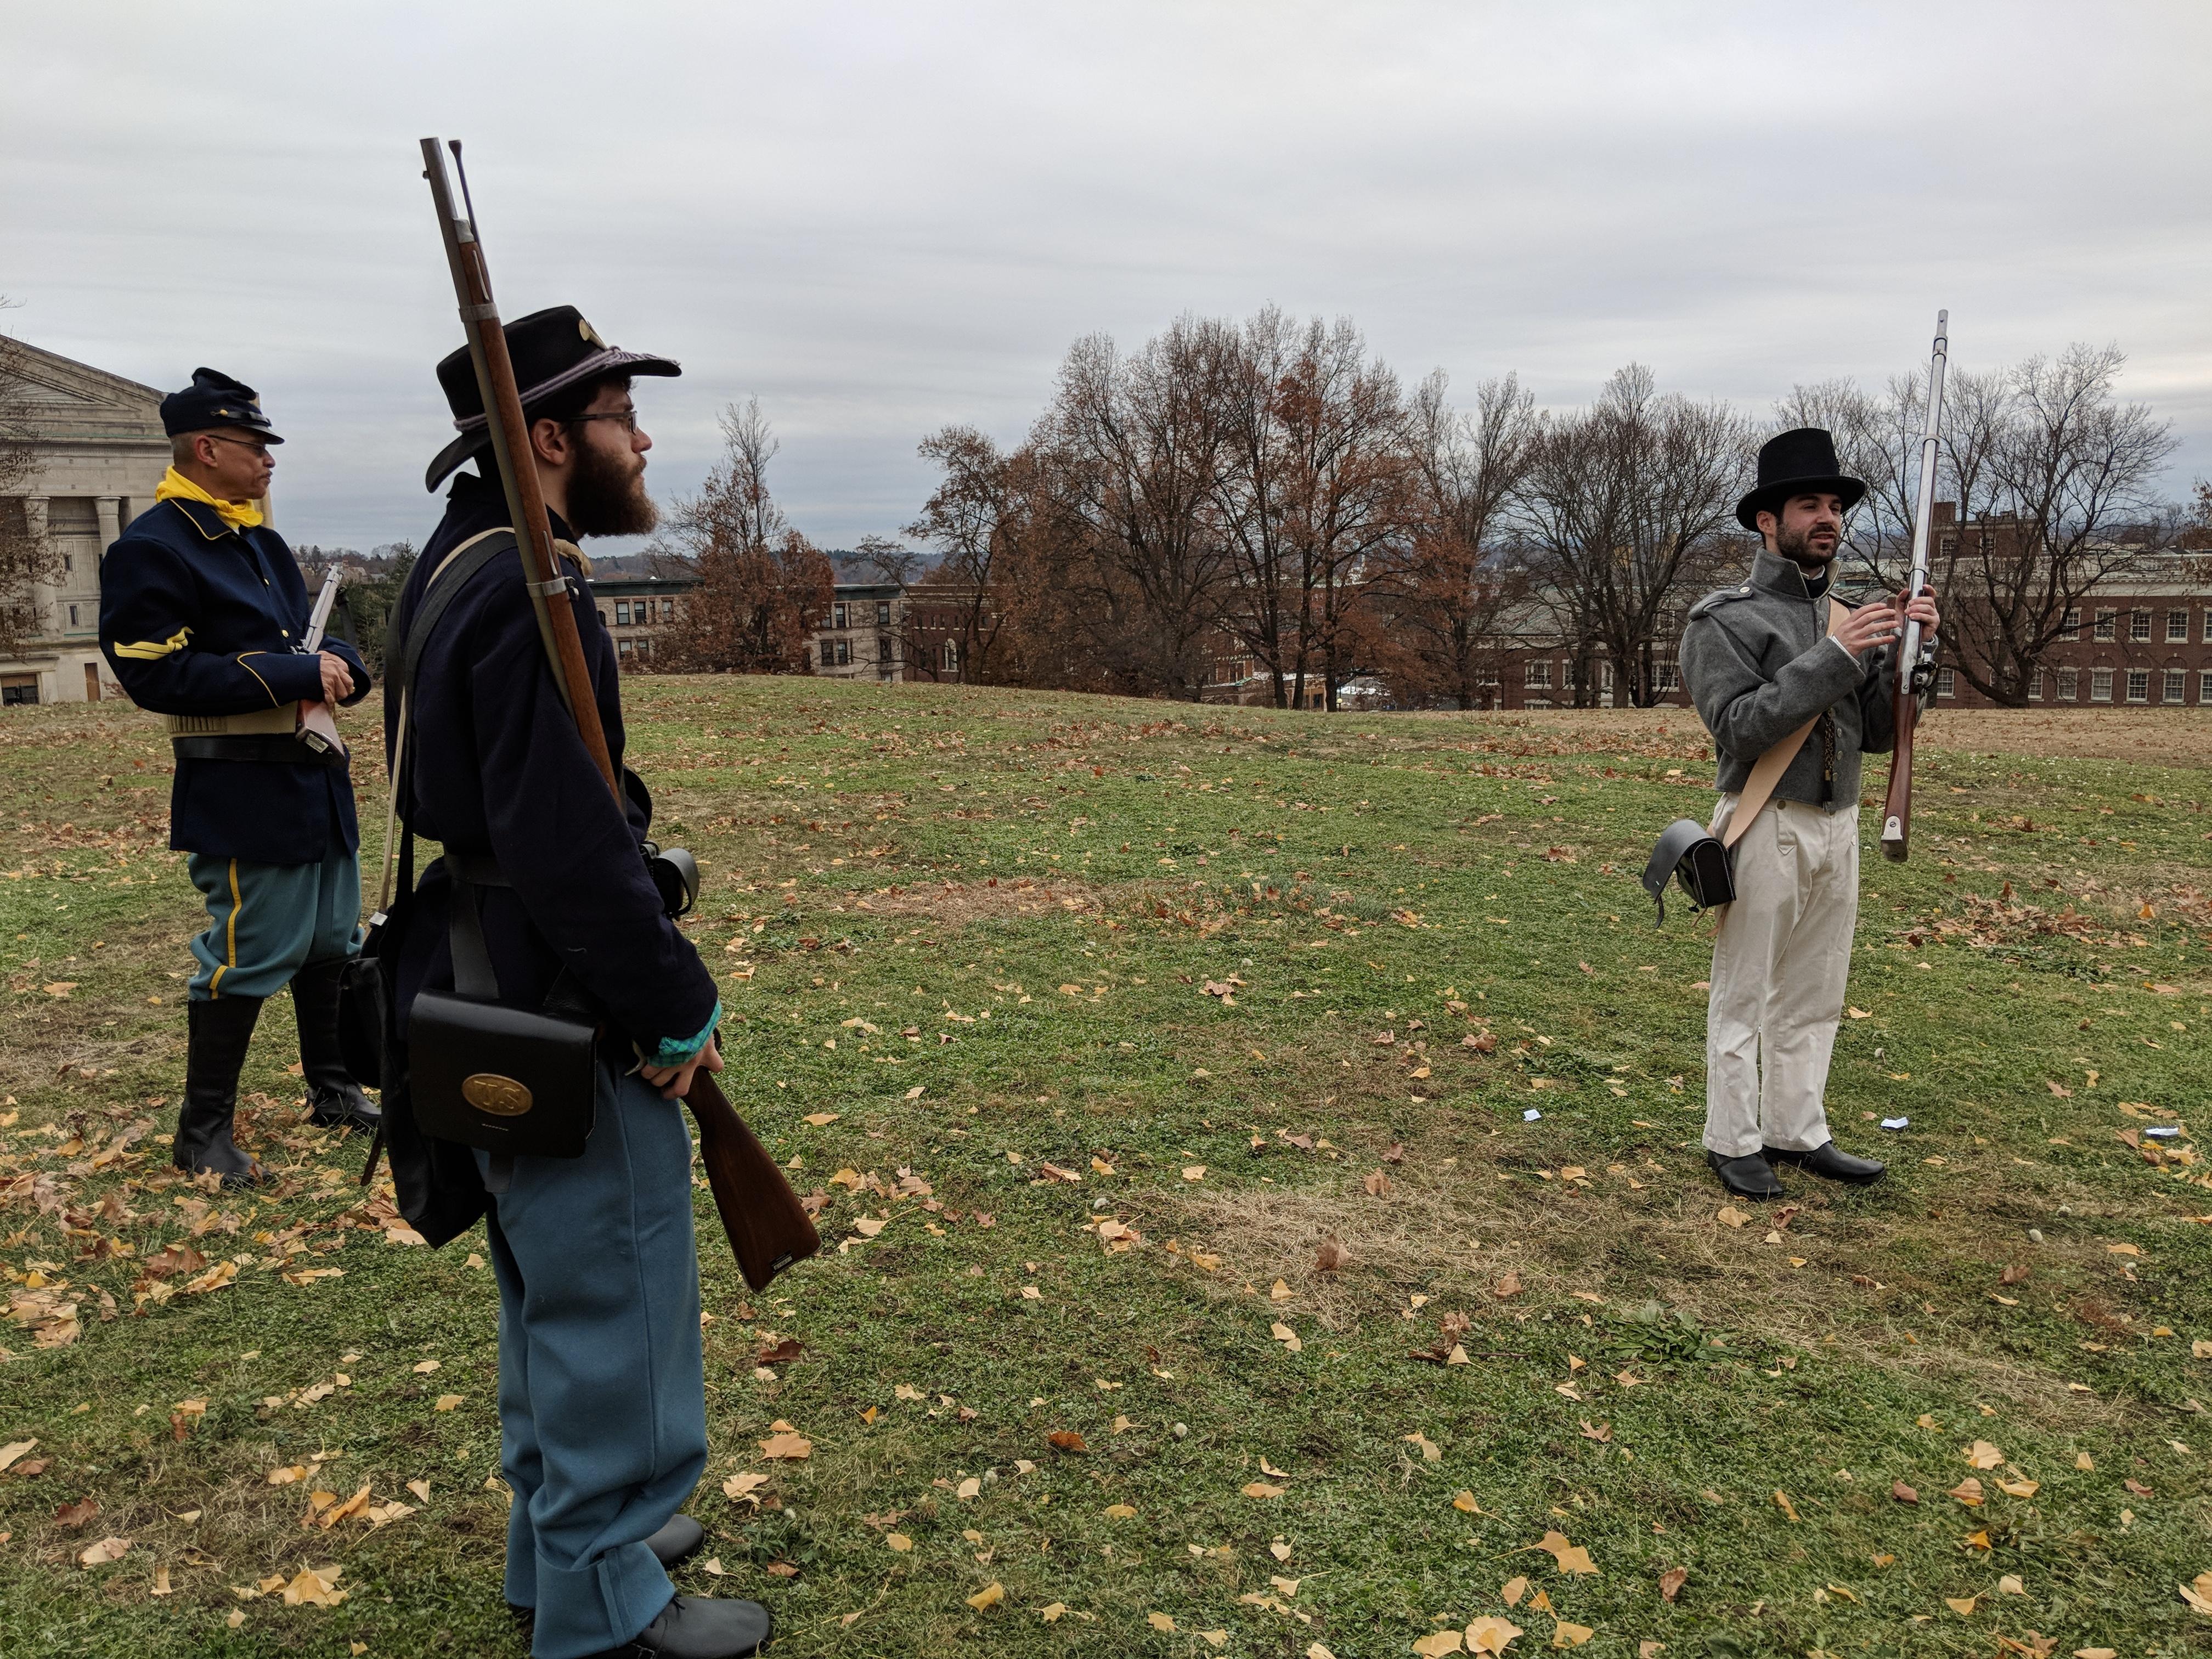 Three Park Volunteers, holding historic firearms, on the grounds of the Armory against a cloudy sky.